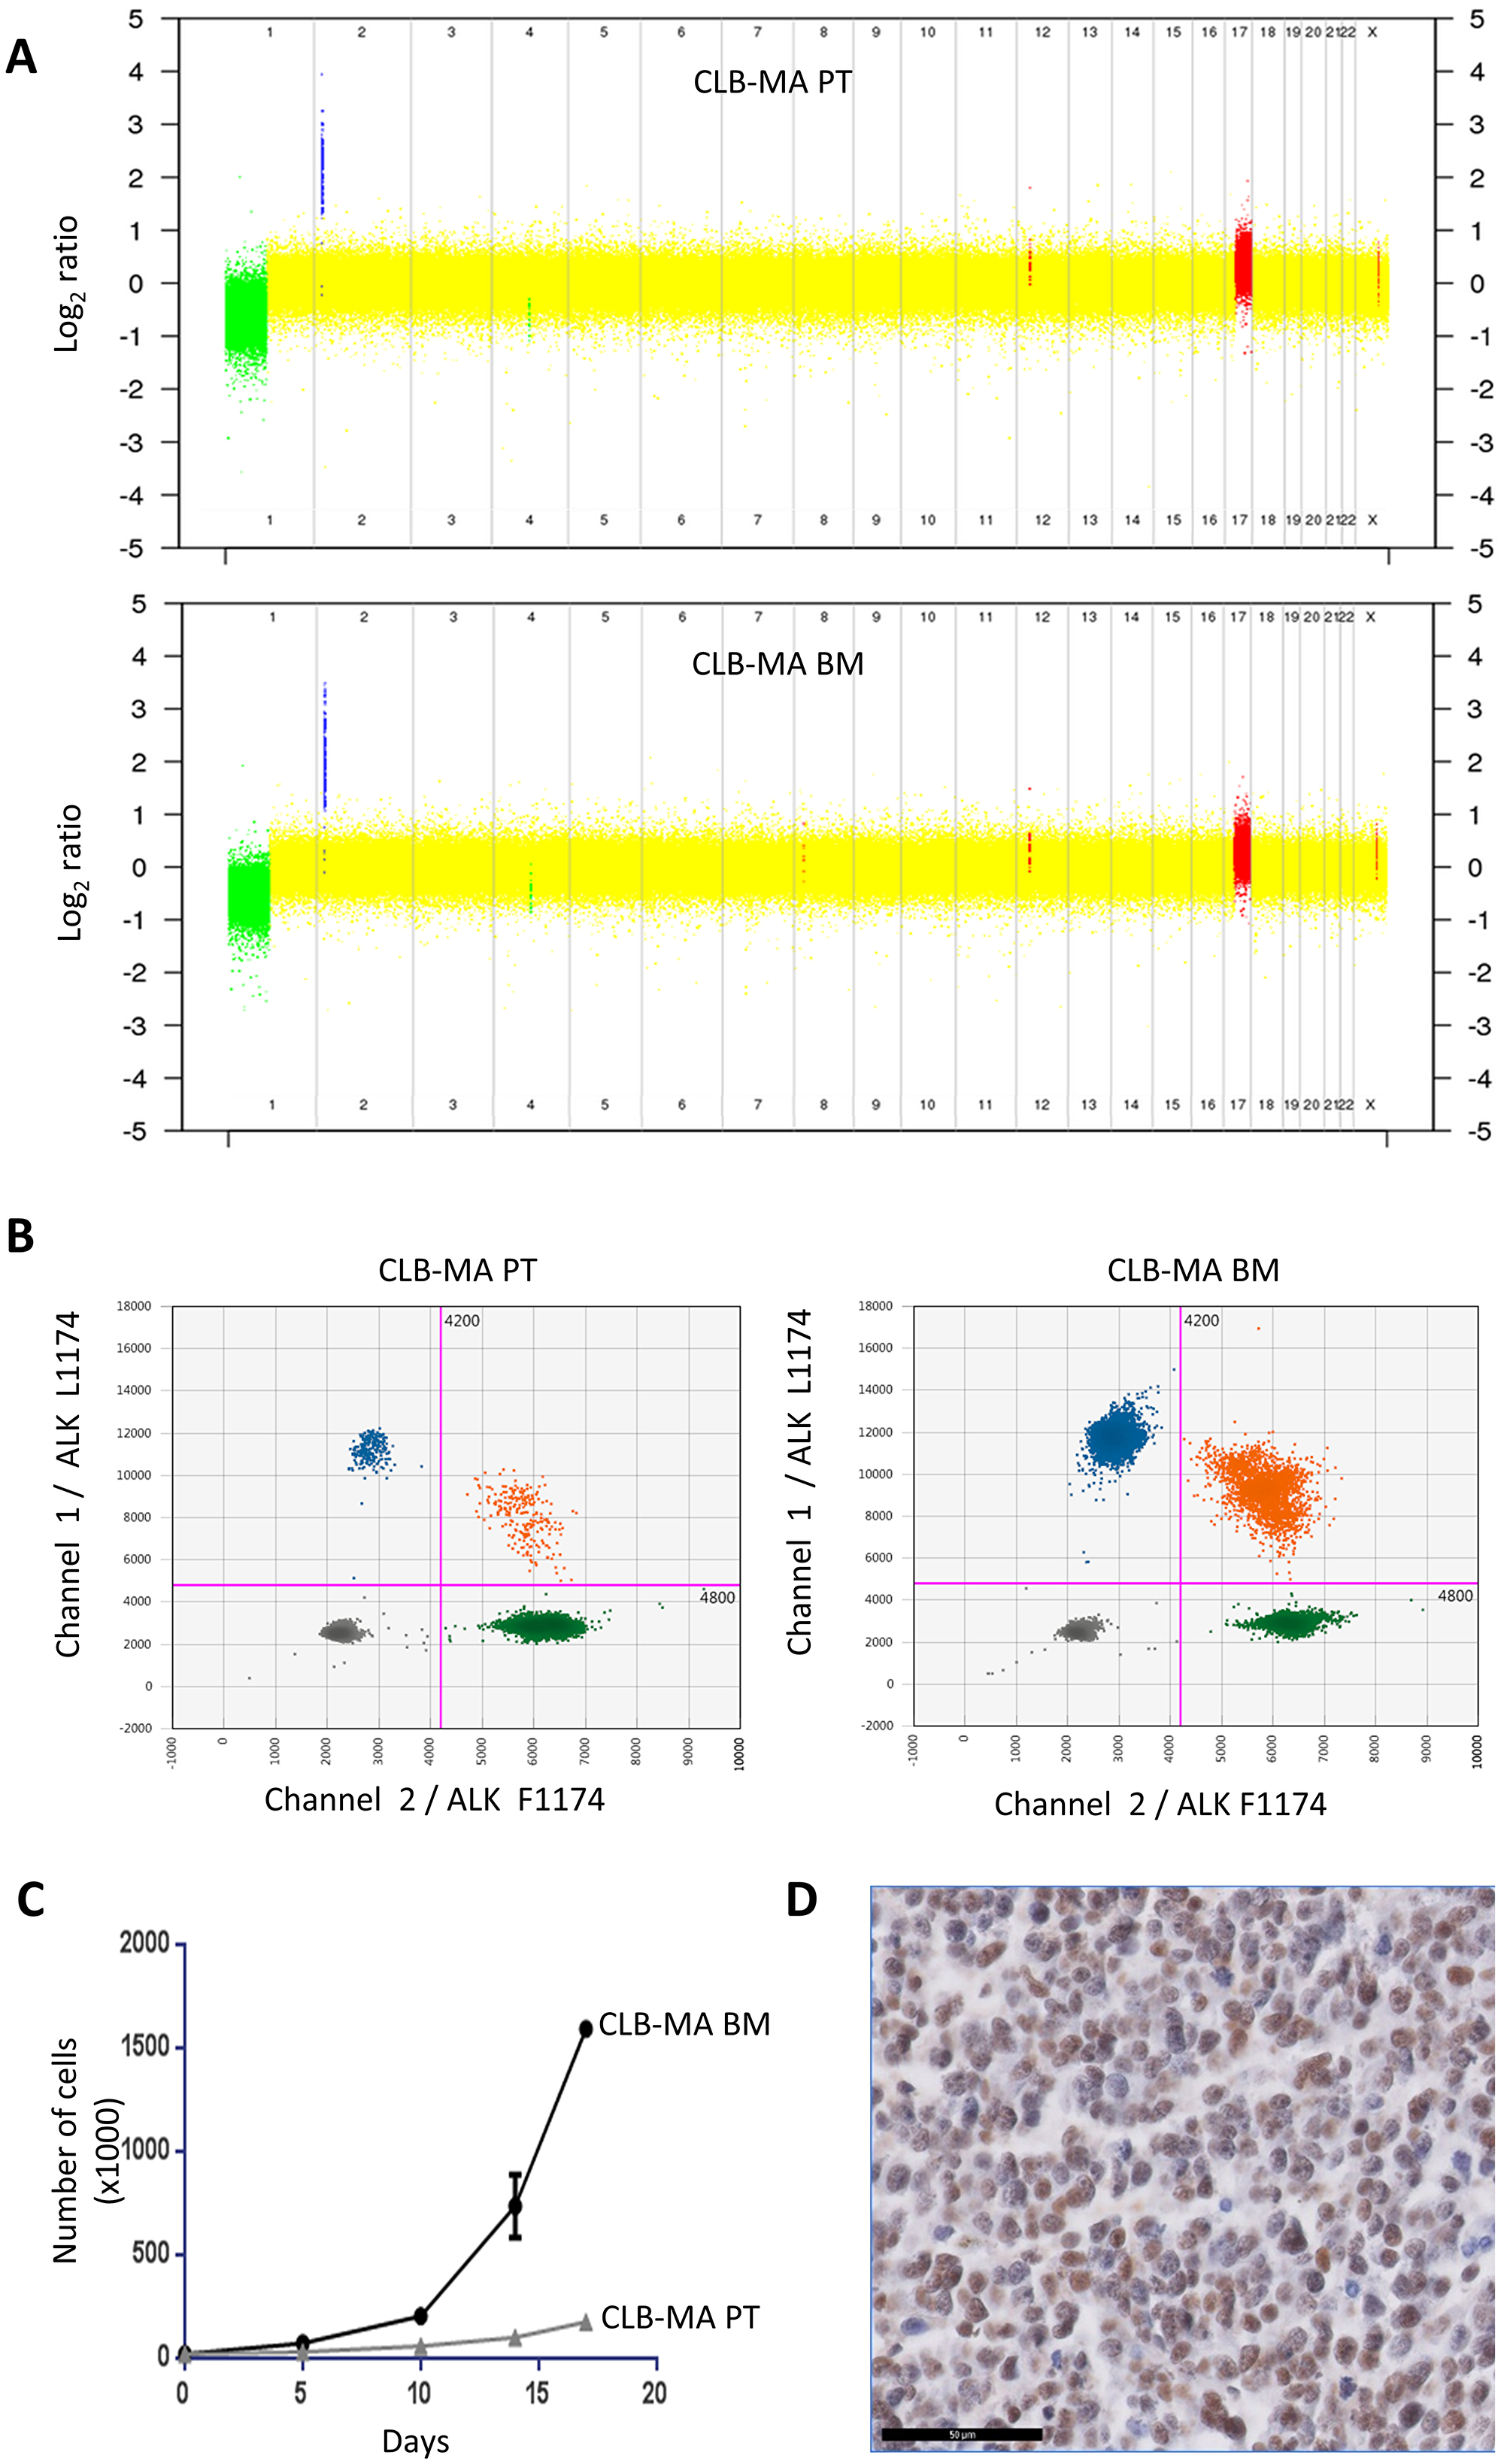 Genomic alterations and growth of the CLB-MA PT and CLB-MA BM neuroblastoma cell lines.